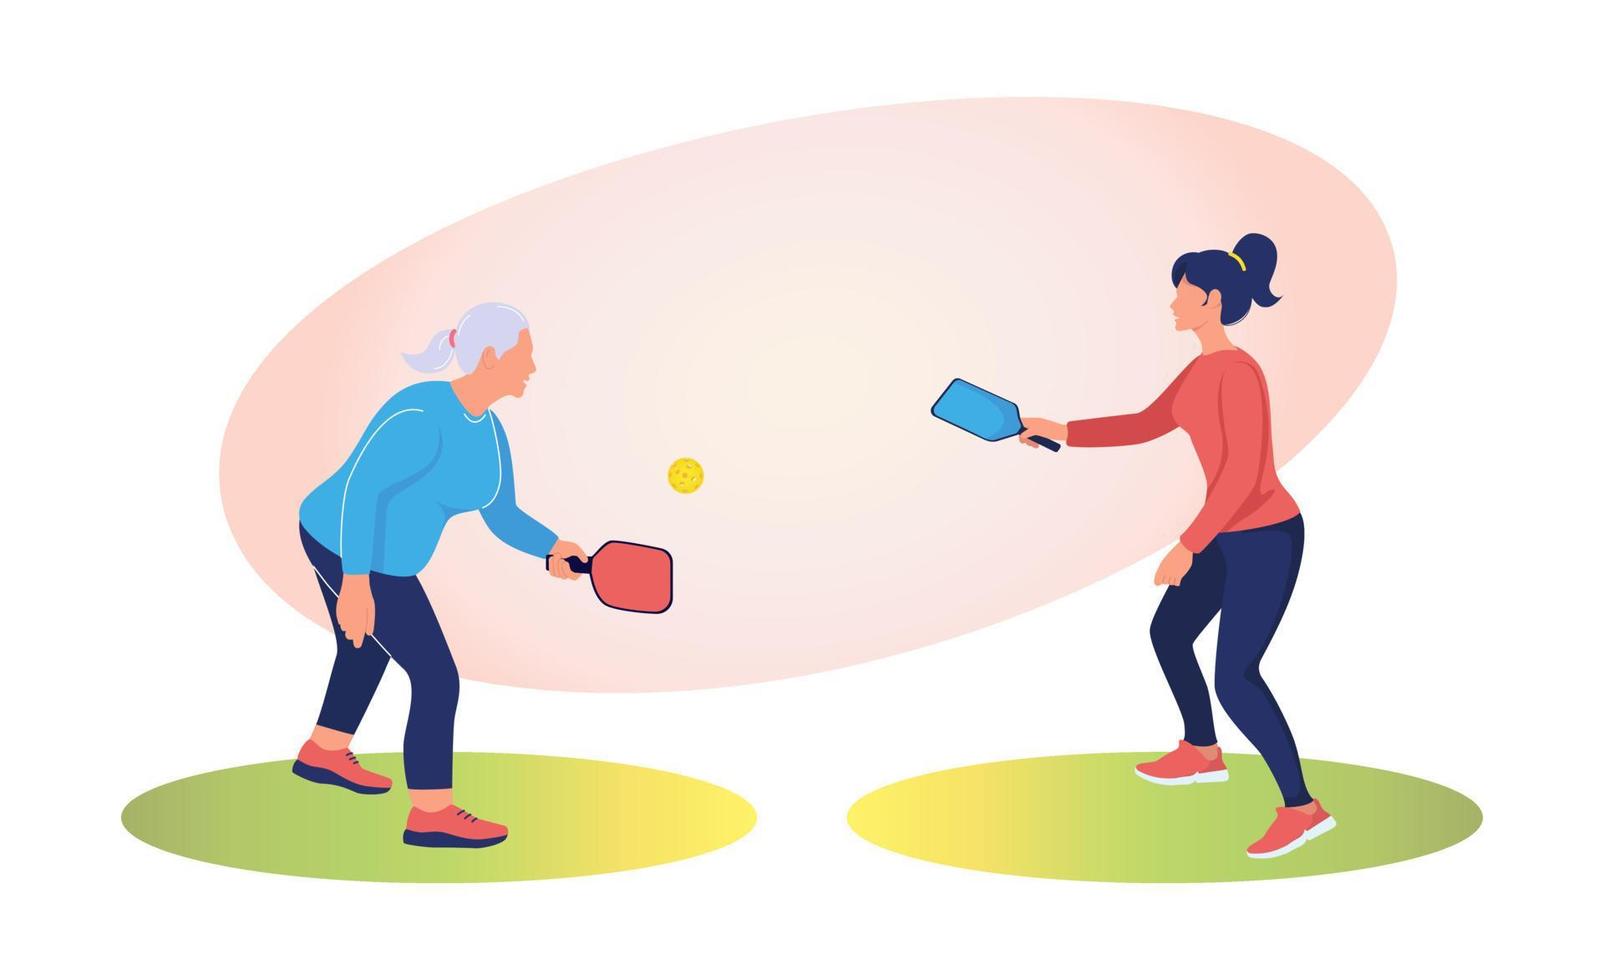 Girl and elderly woman play pickleball. Athlete, human figure with racket and ball. Outdoor sports. Summer sports. Active pickleball game for whole family. Active old age. Vector illustration